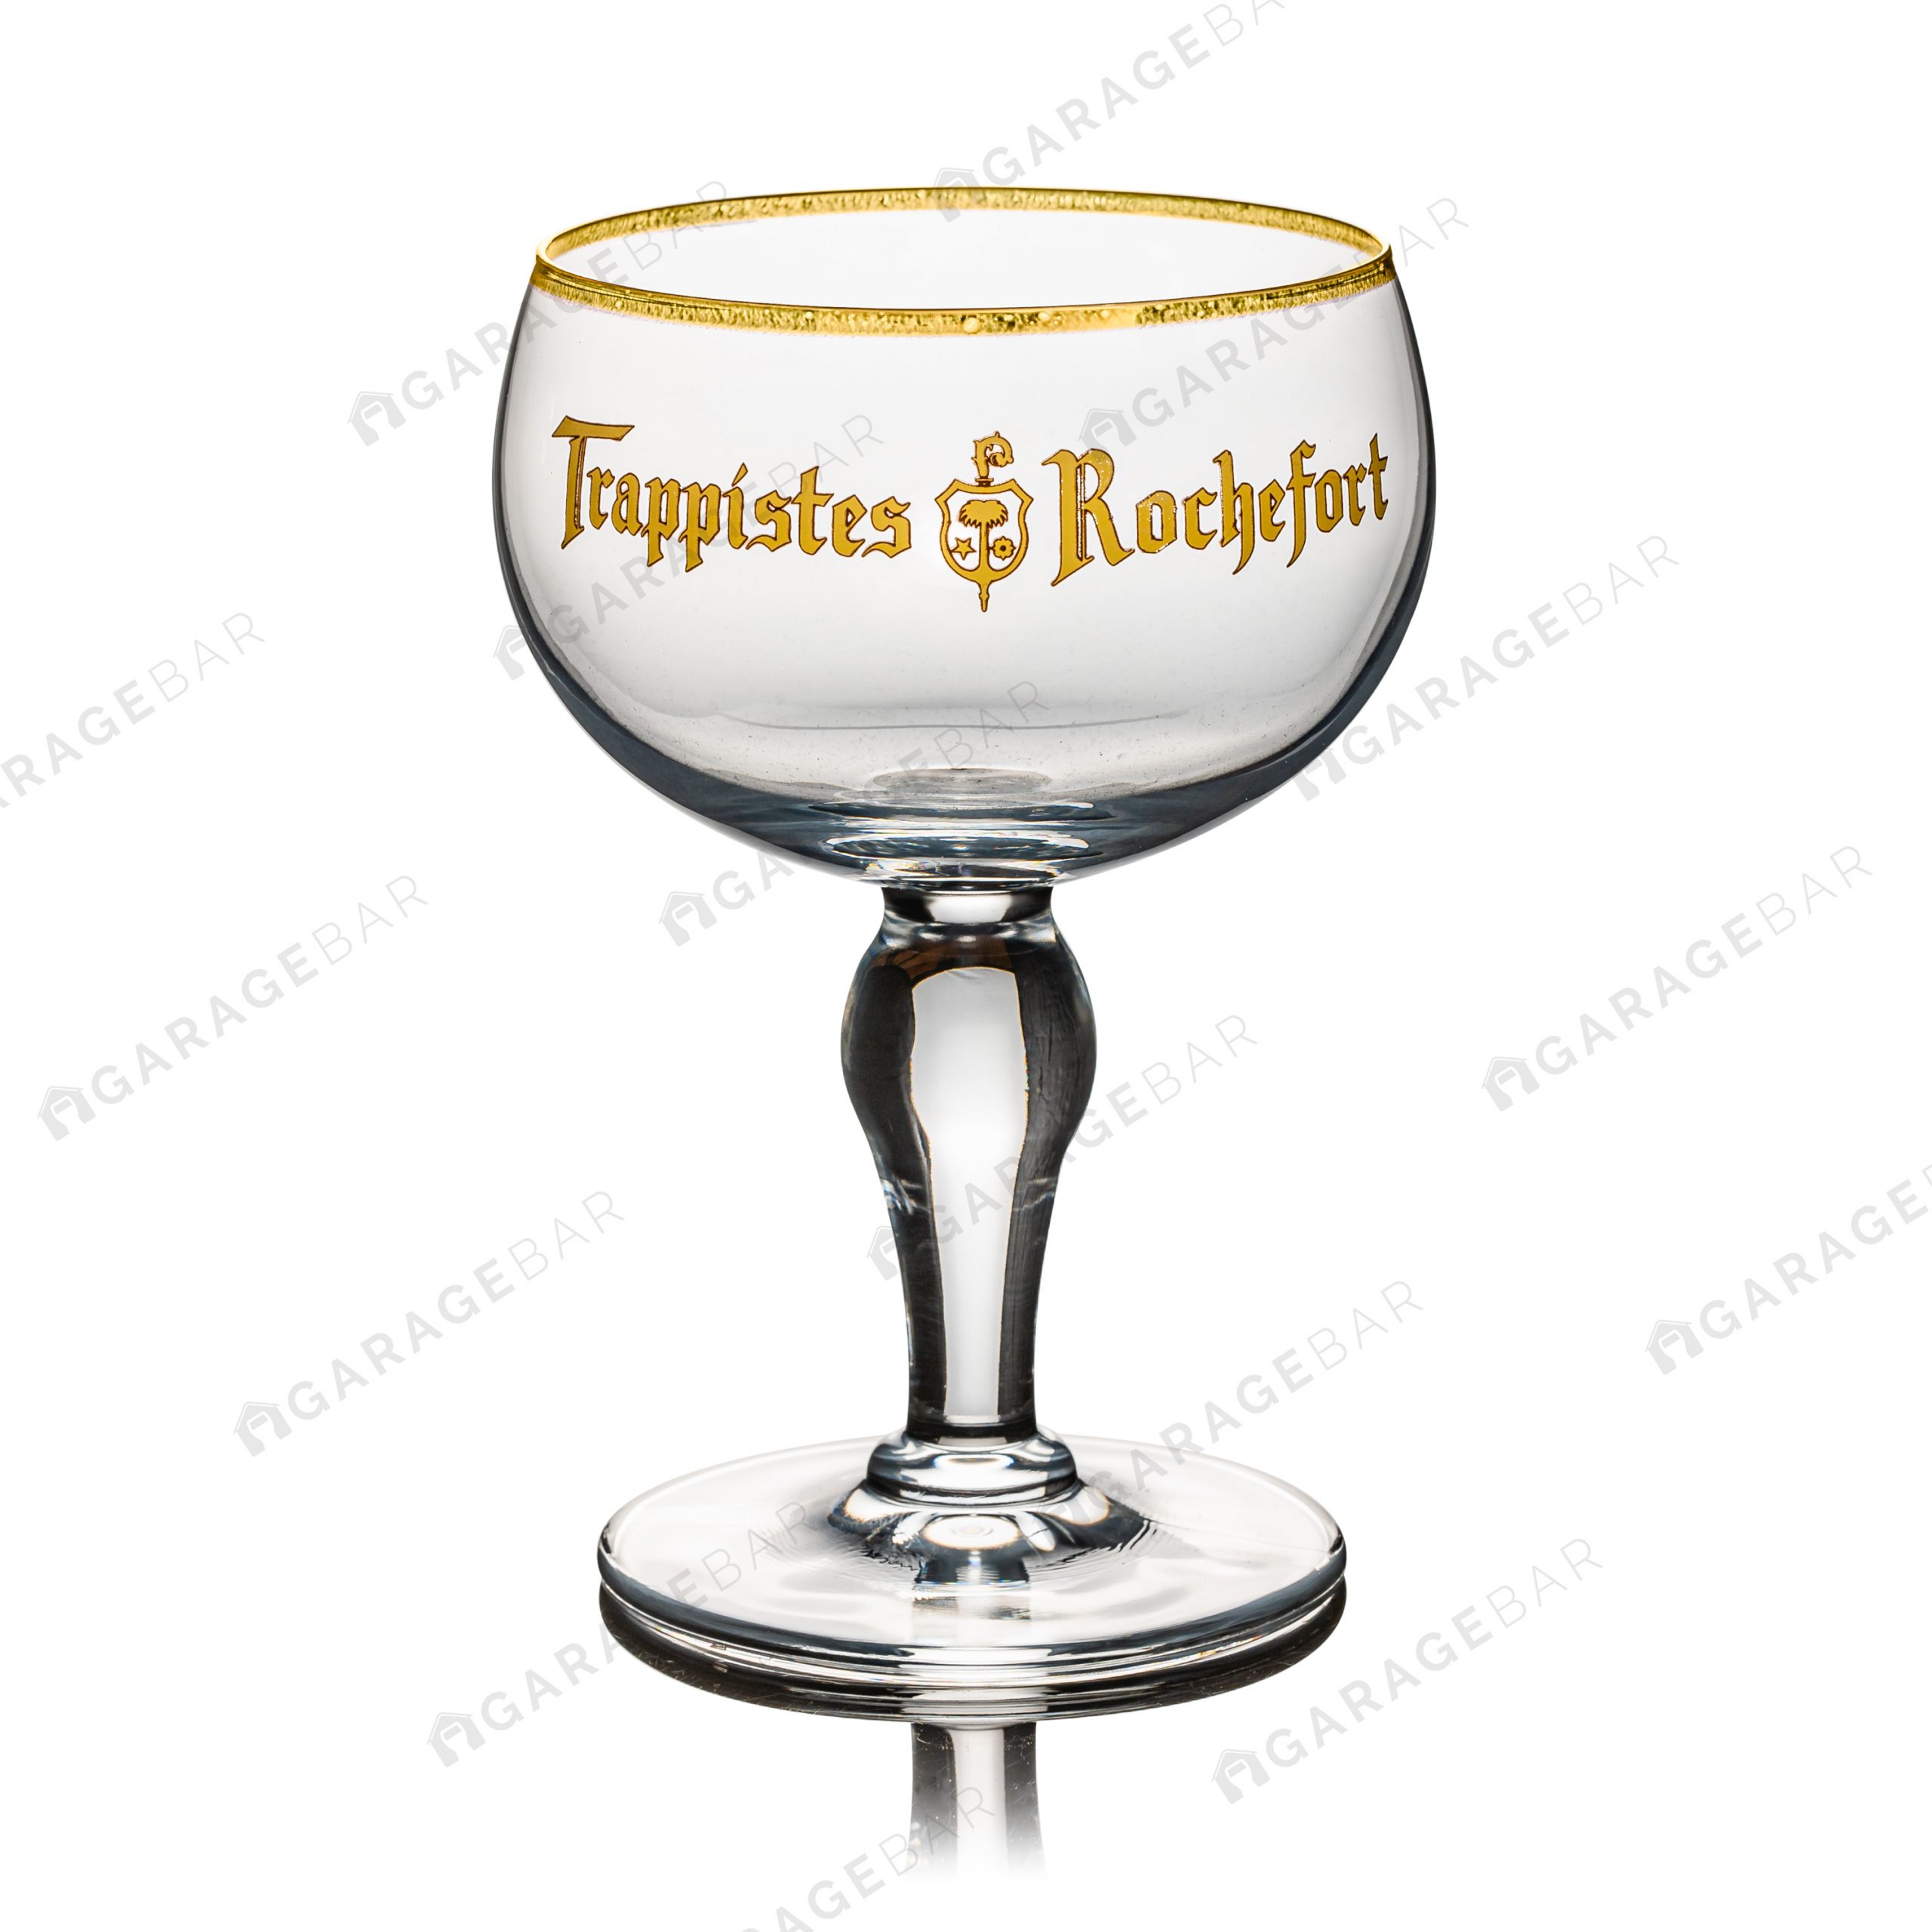 Trappistes Rochefort Beer Glass